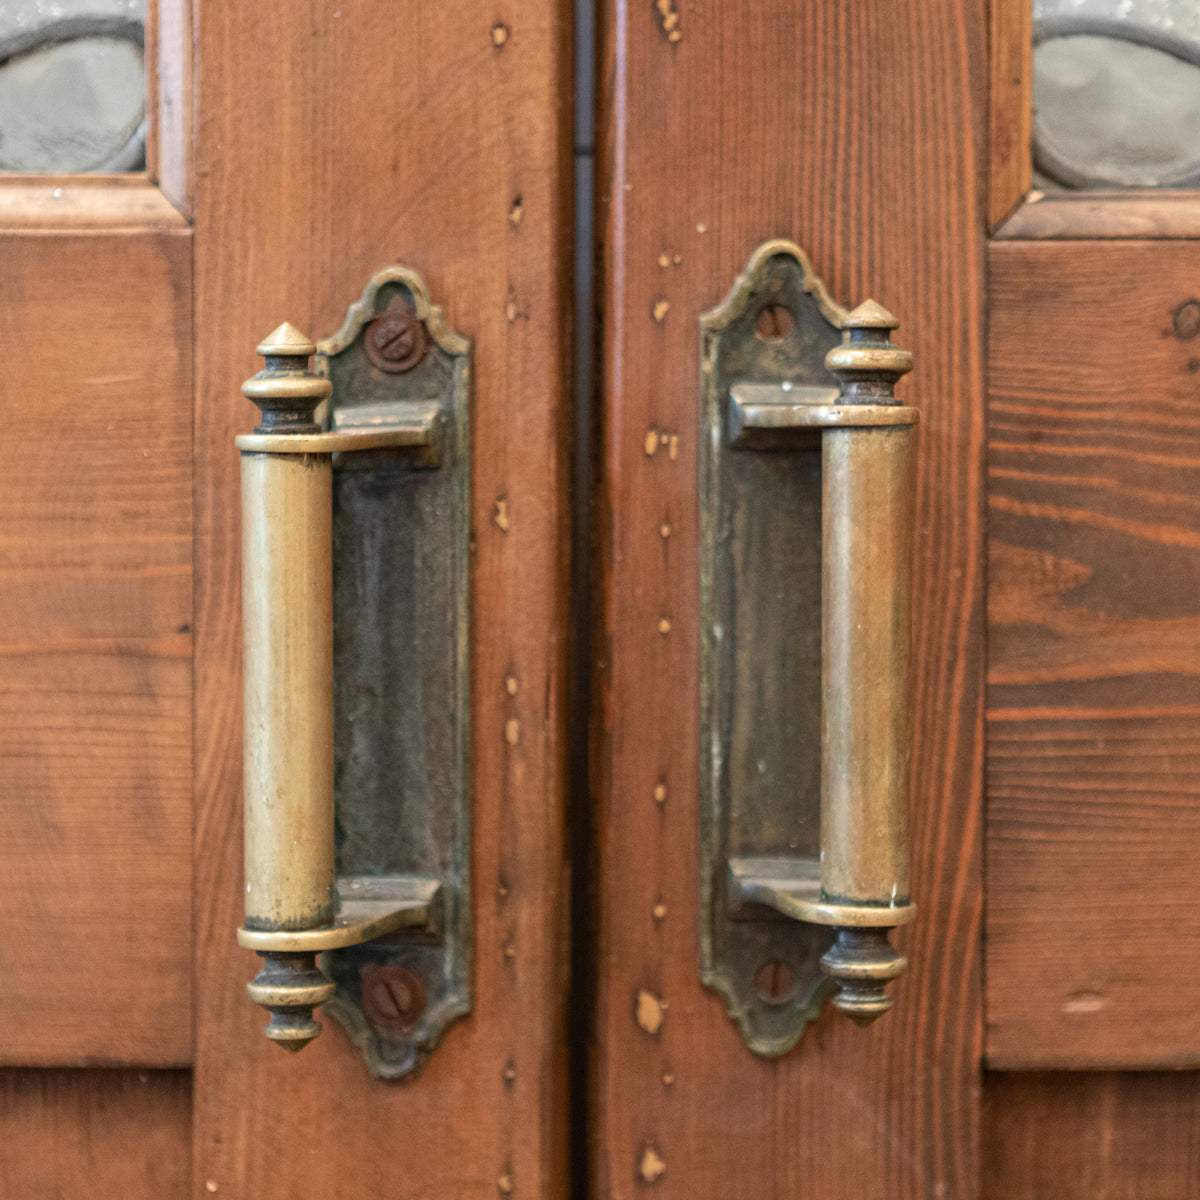 Reclaimed Glazed Double Doors | Westminster Chapel | The Architectural Forum